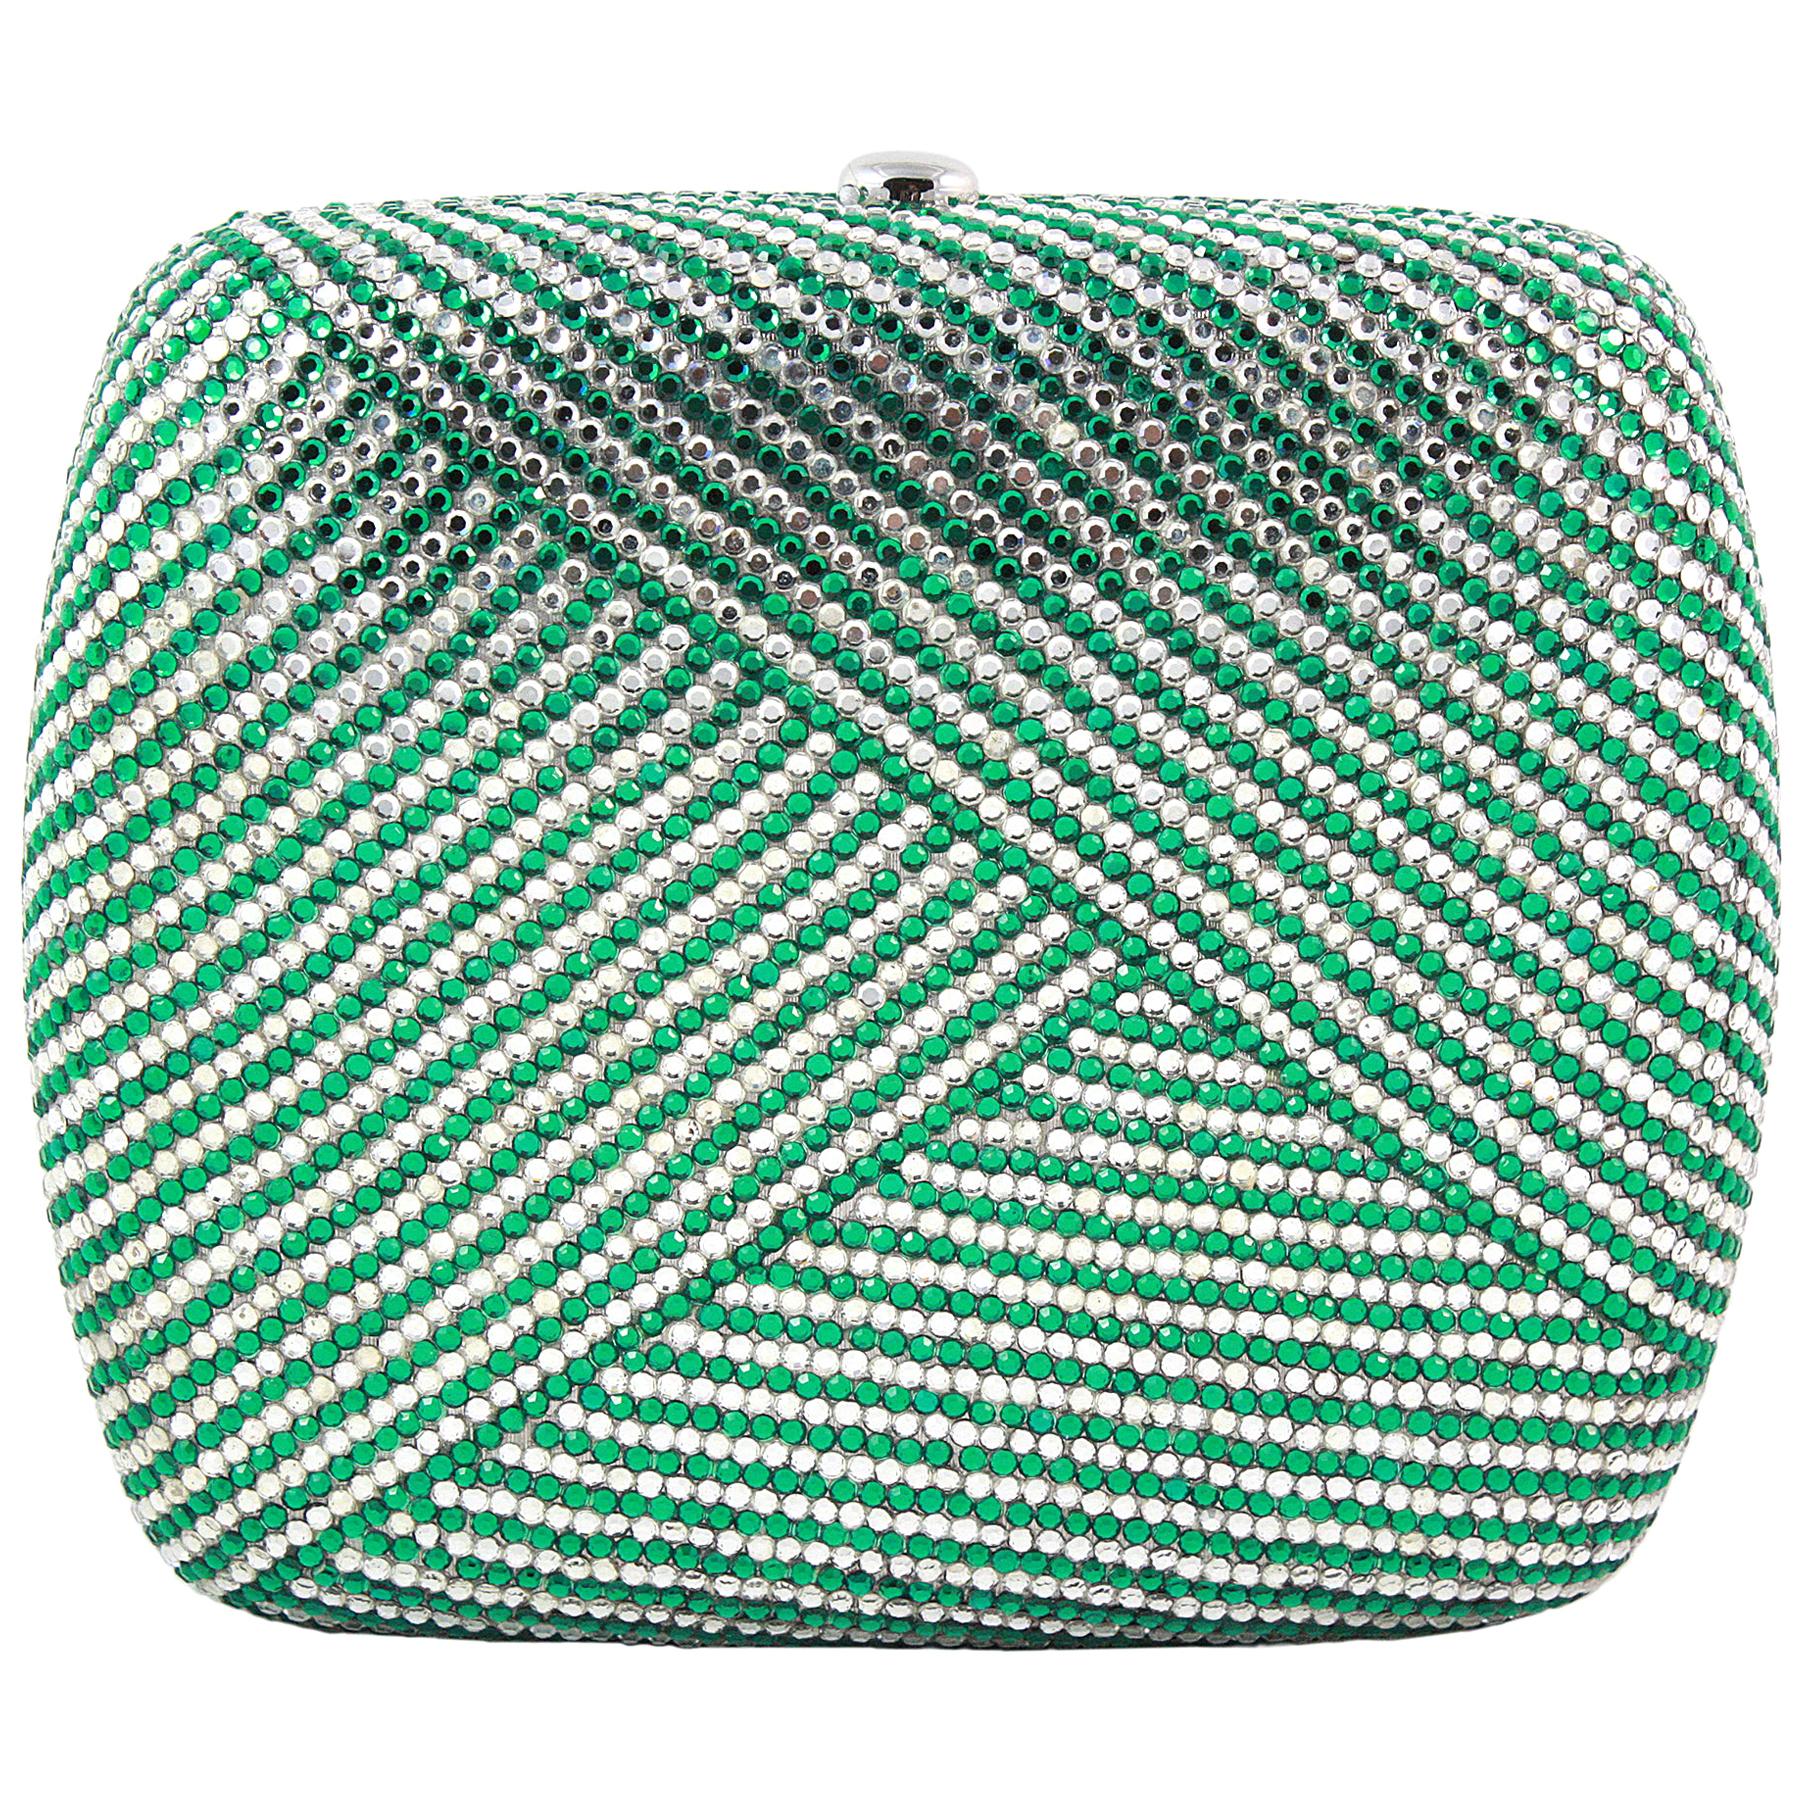  Judith Leiber Clear and Green Rhinestone Clutch For Sale